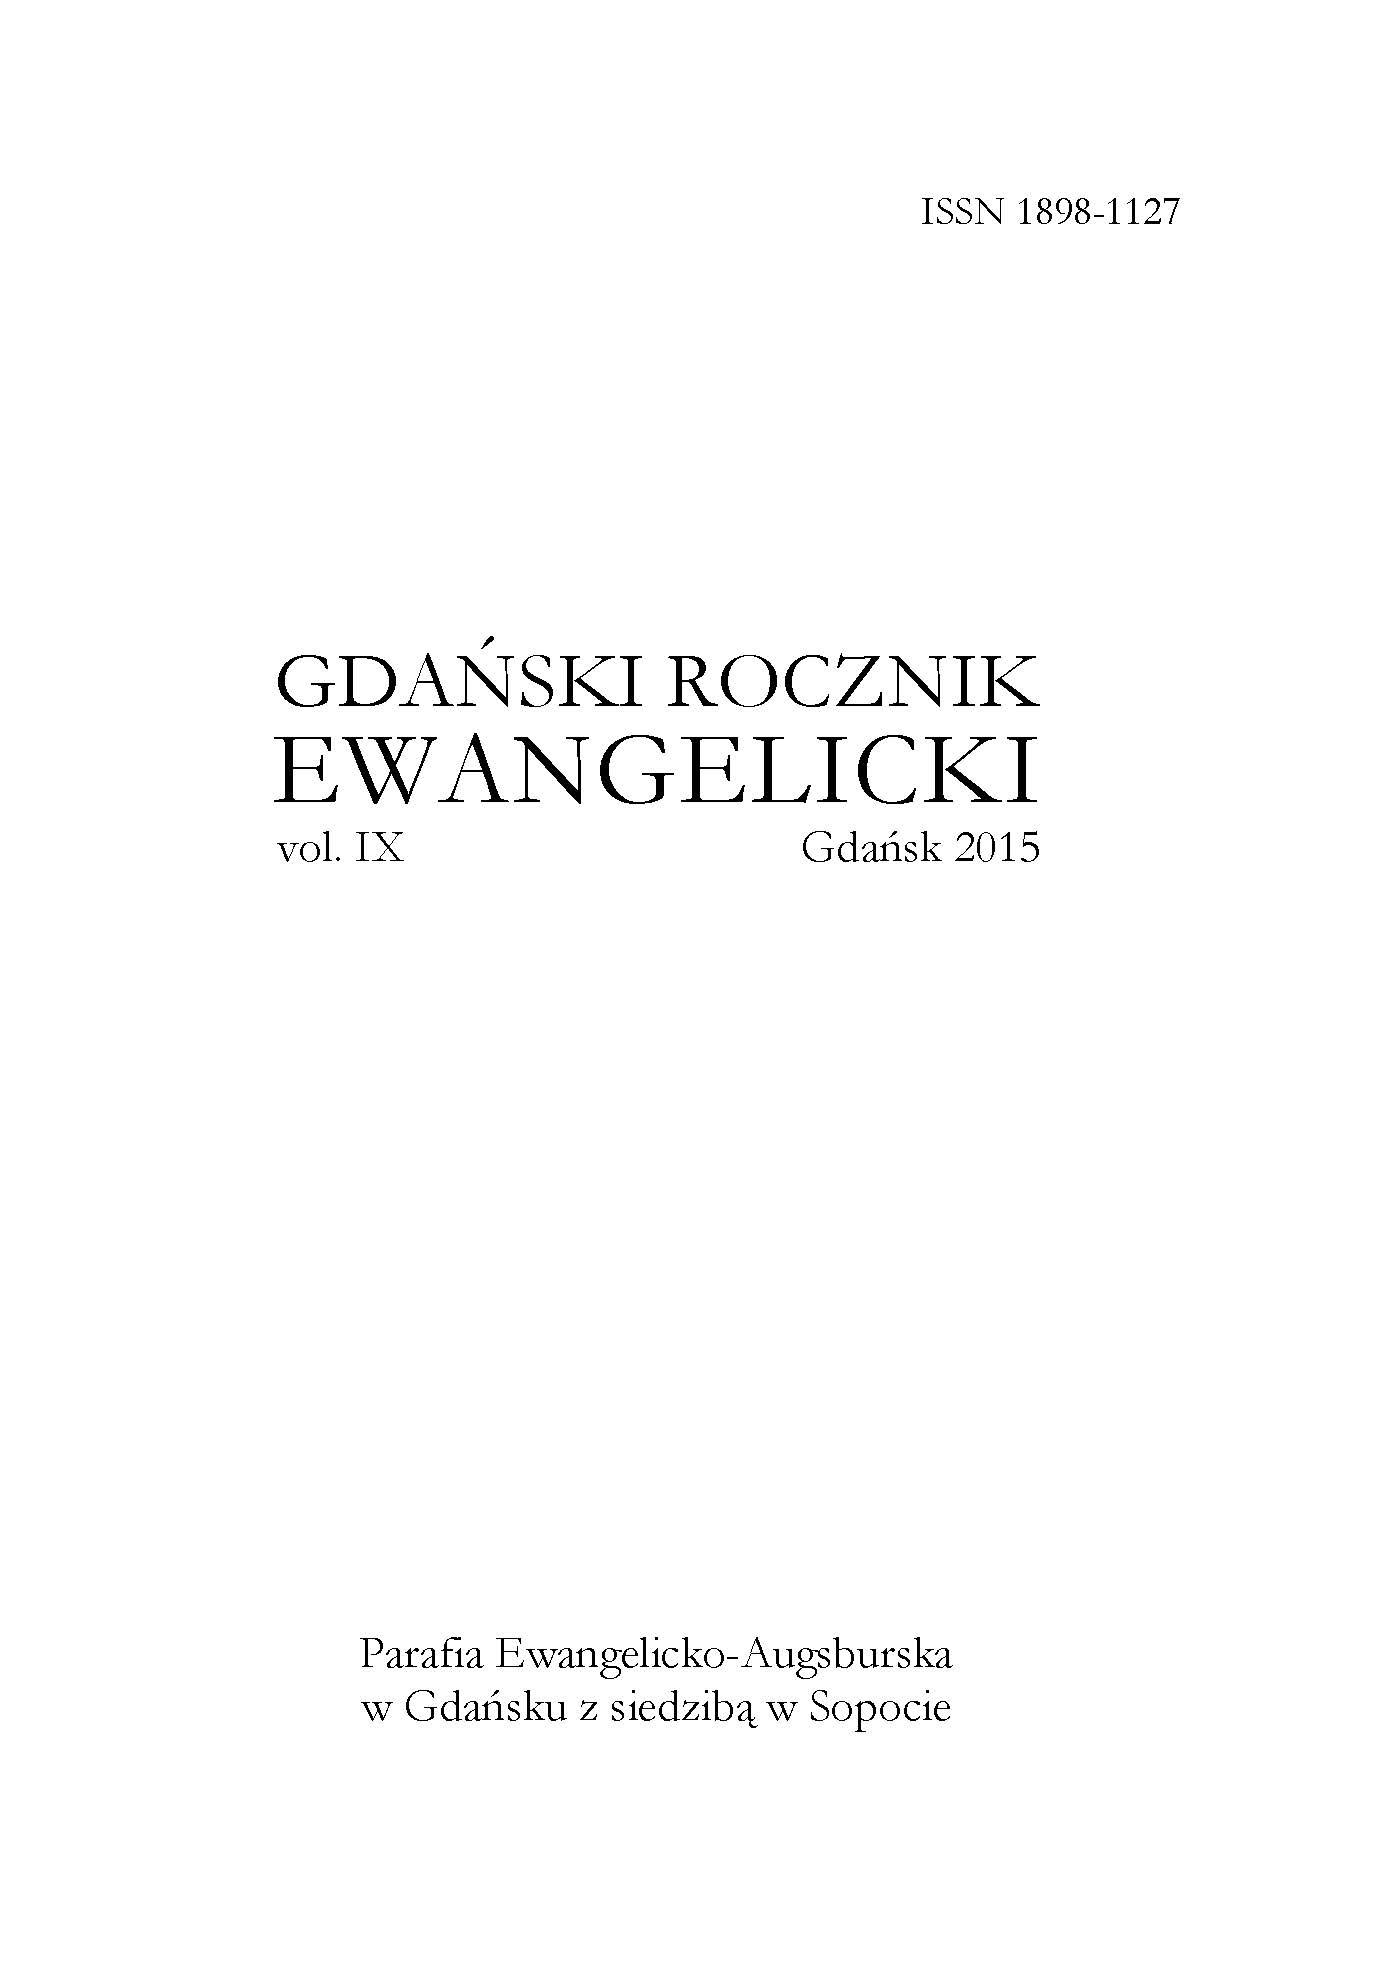 An Outline of the History of the Lutheran Parish in Białystok from World War I to World War II Cover Image